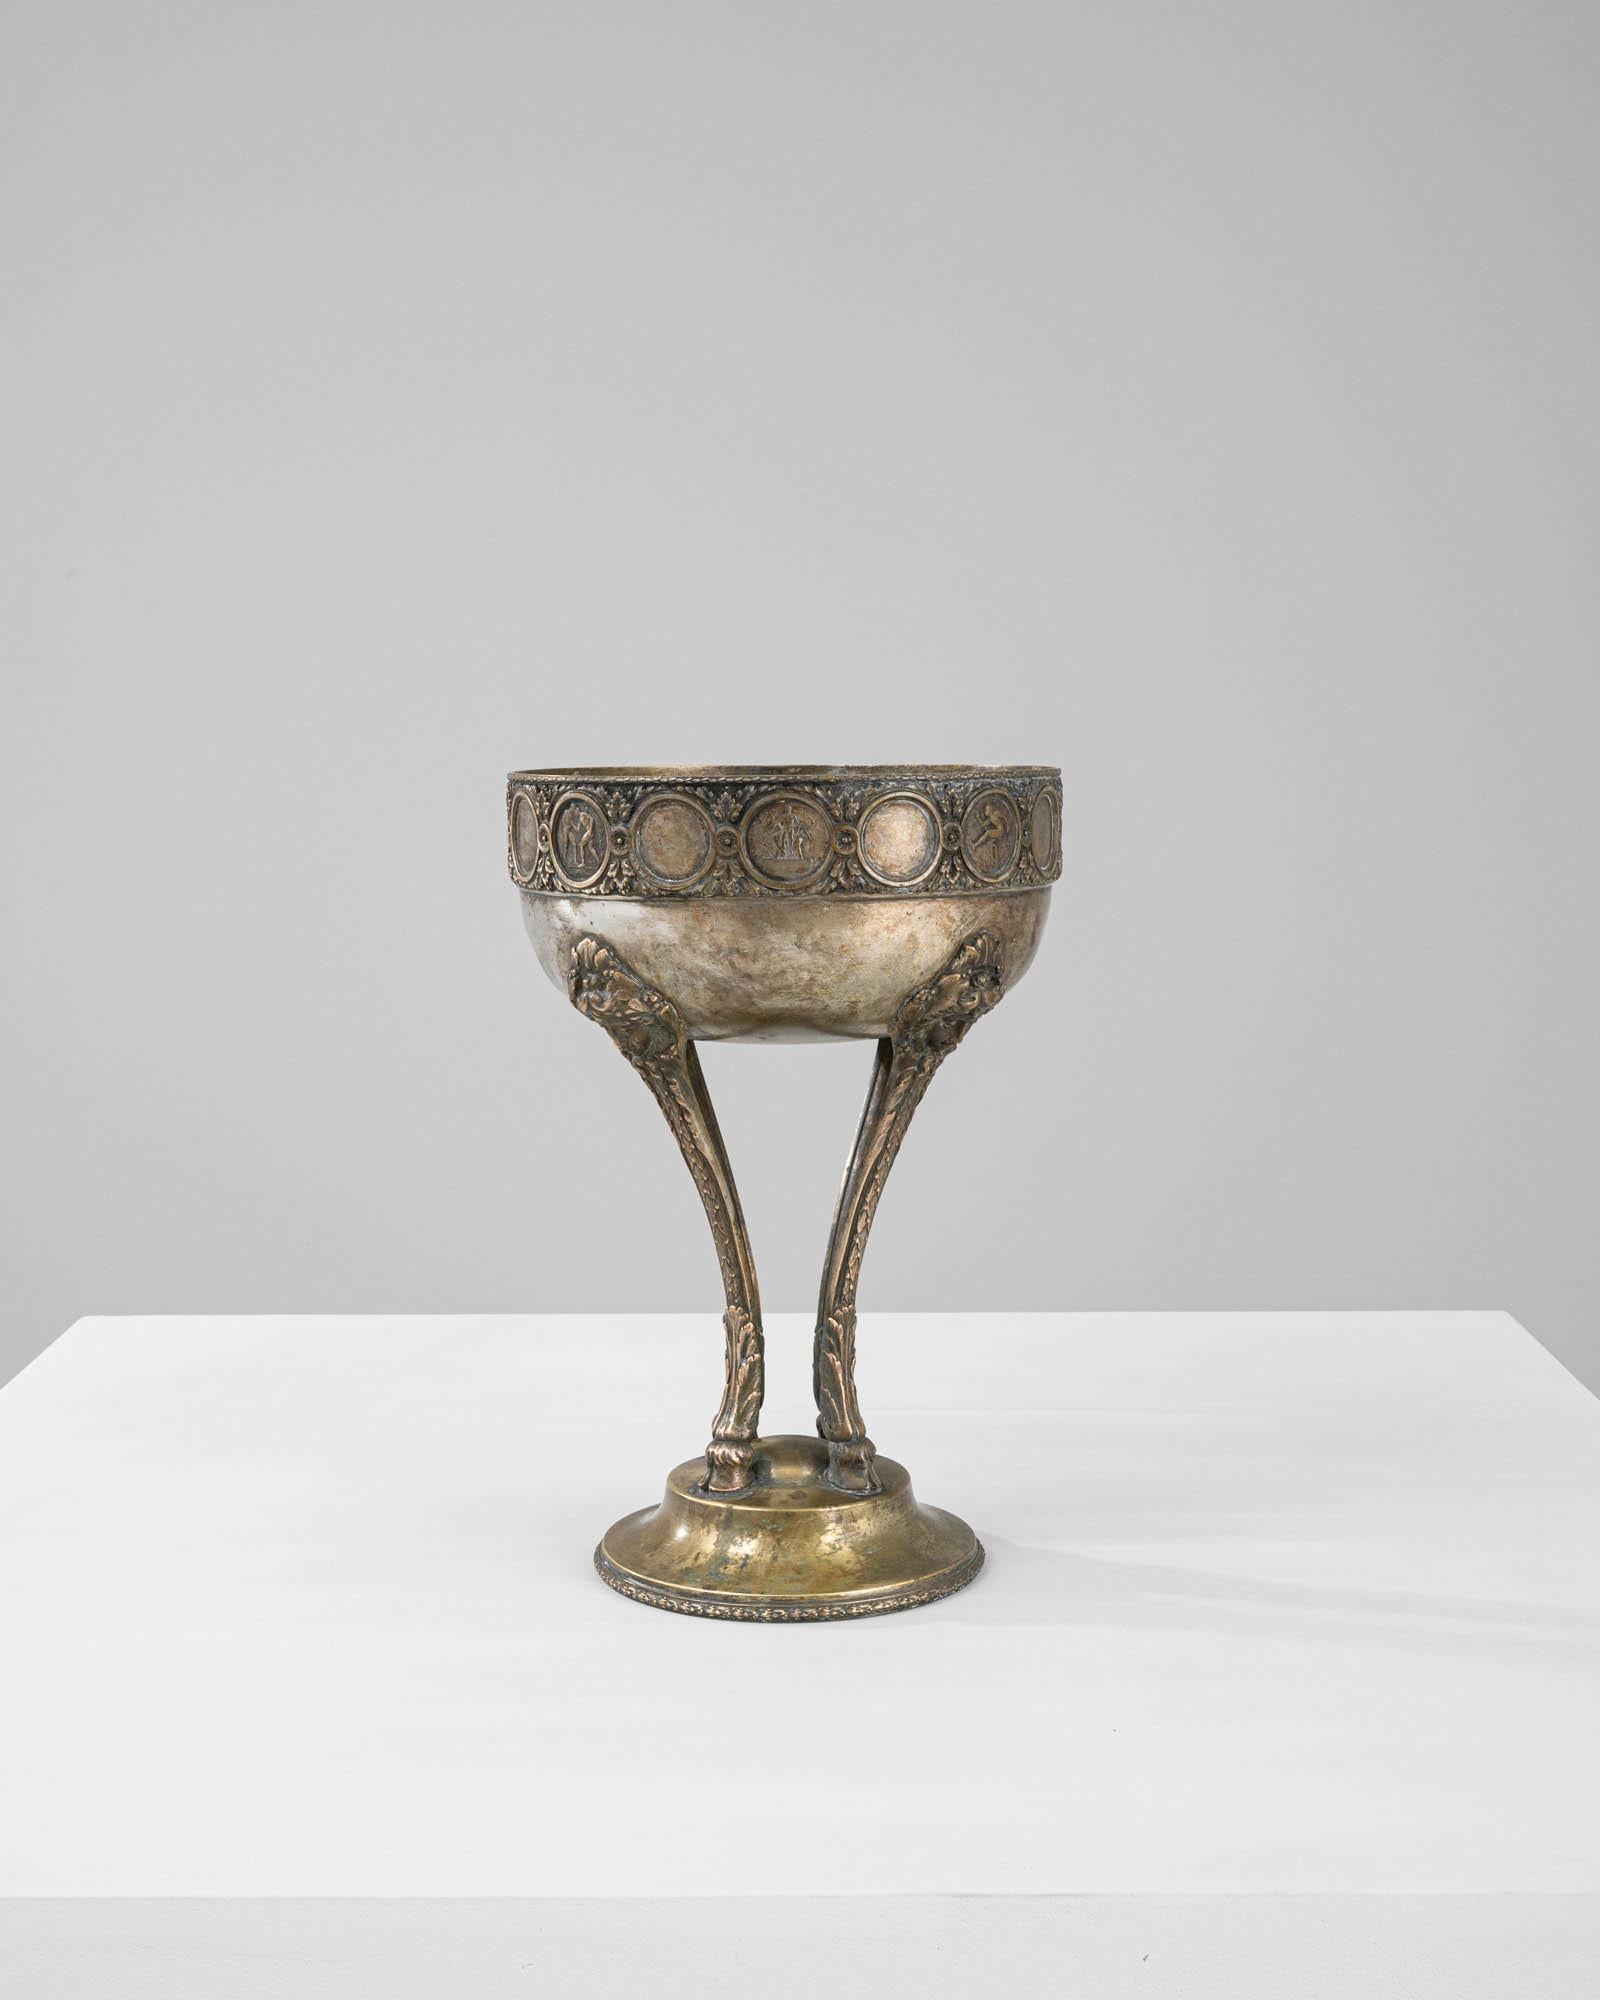 This 1900s French Metal Goblet is a true embodiment of eclectic elegance, marrying the refined Art Nouveau style with a touch of whimsy. Atop its solid circular base rise four slender hooves, a nod to neoclassical motifs, which hold the chalice